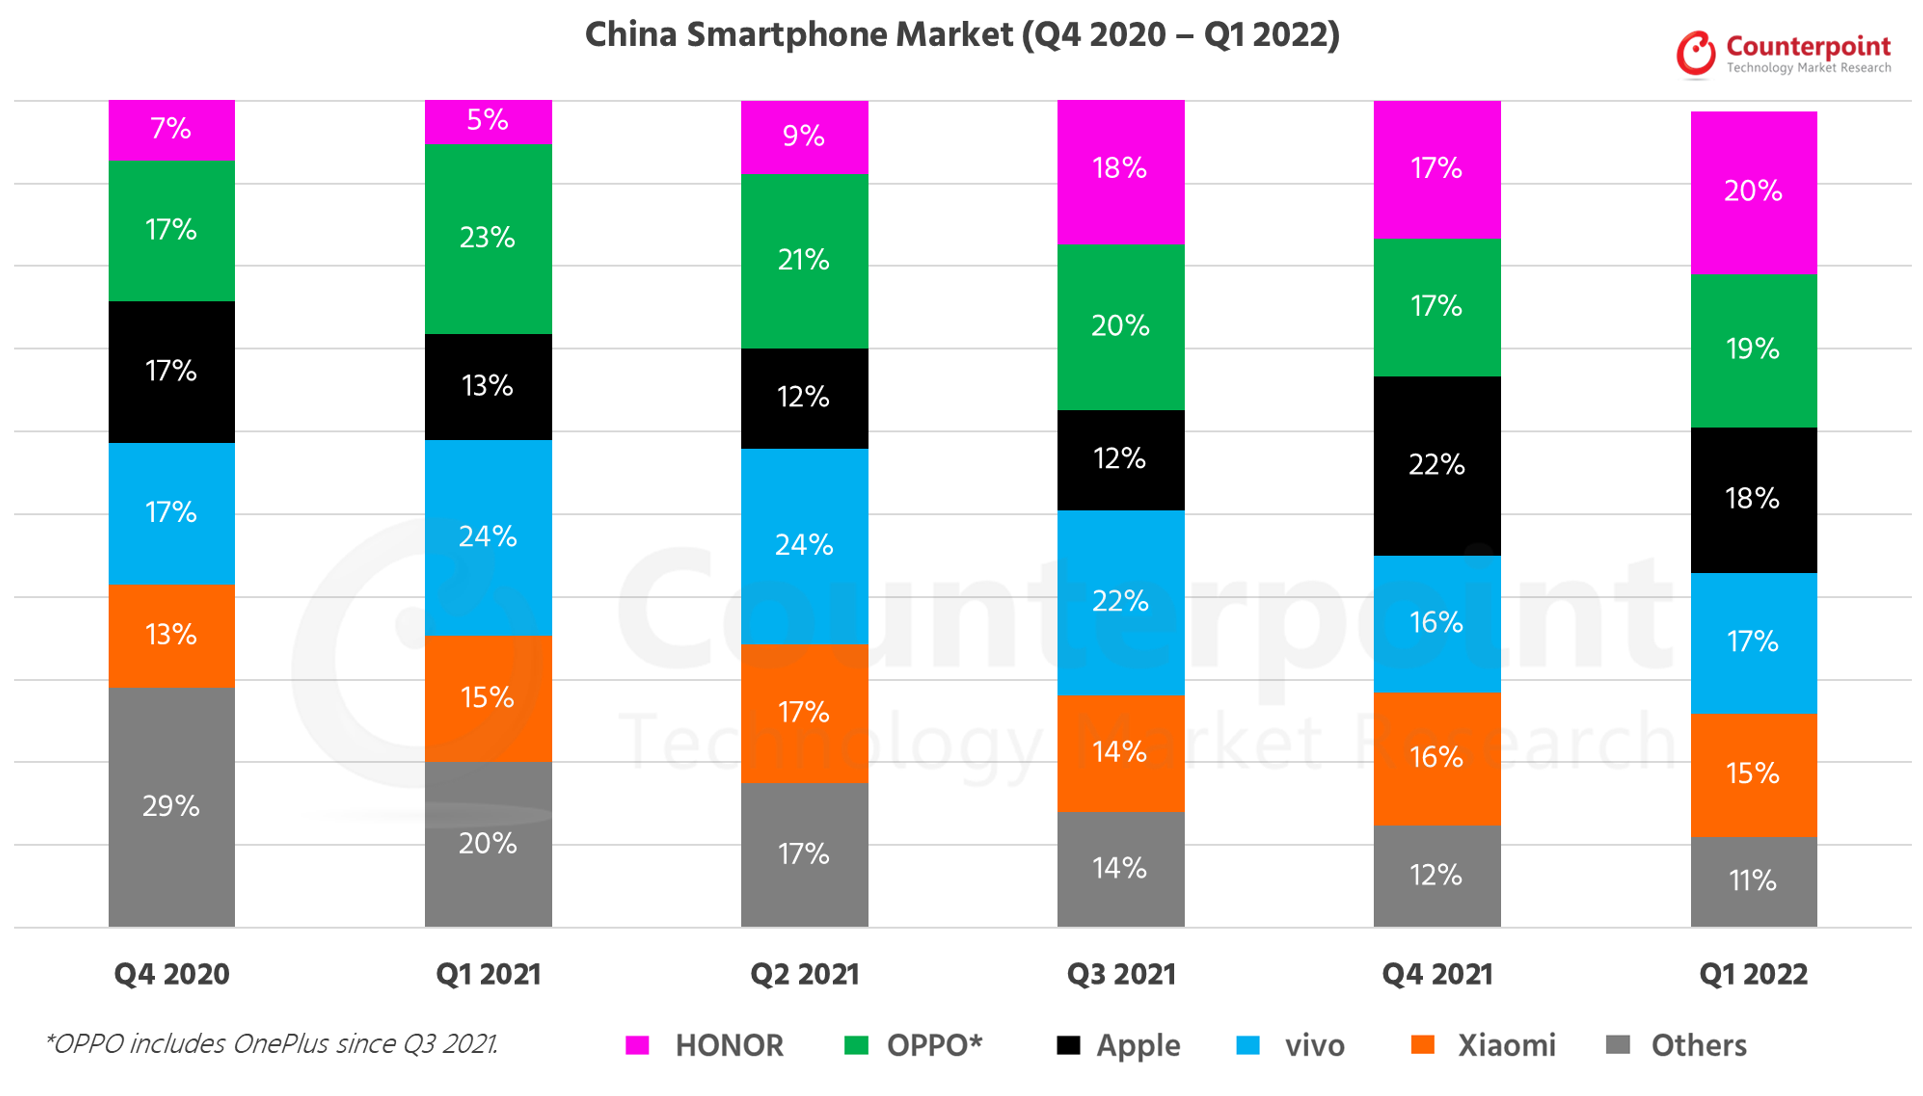 Counterpoint Research China Smartphone Market Q1 2022